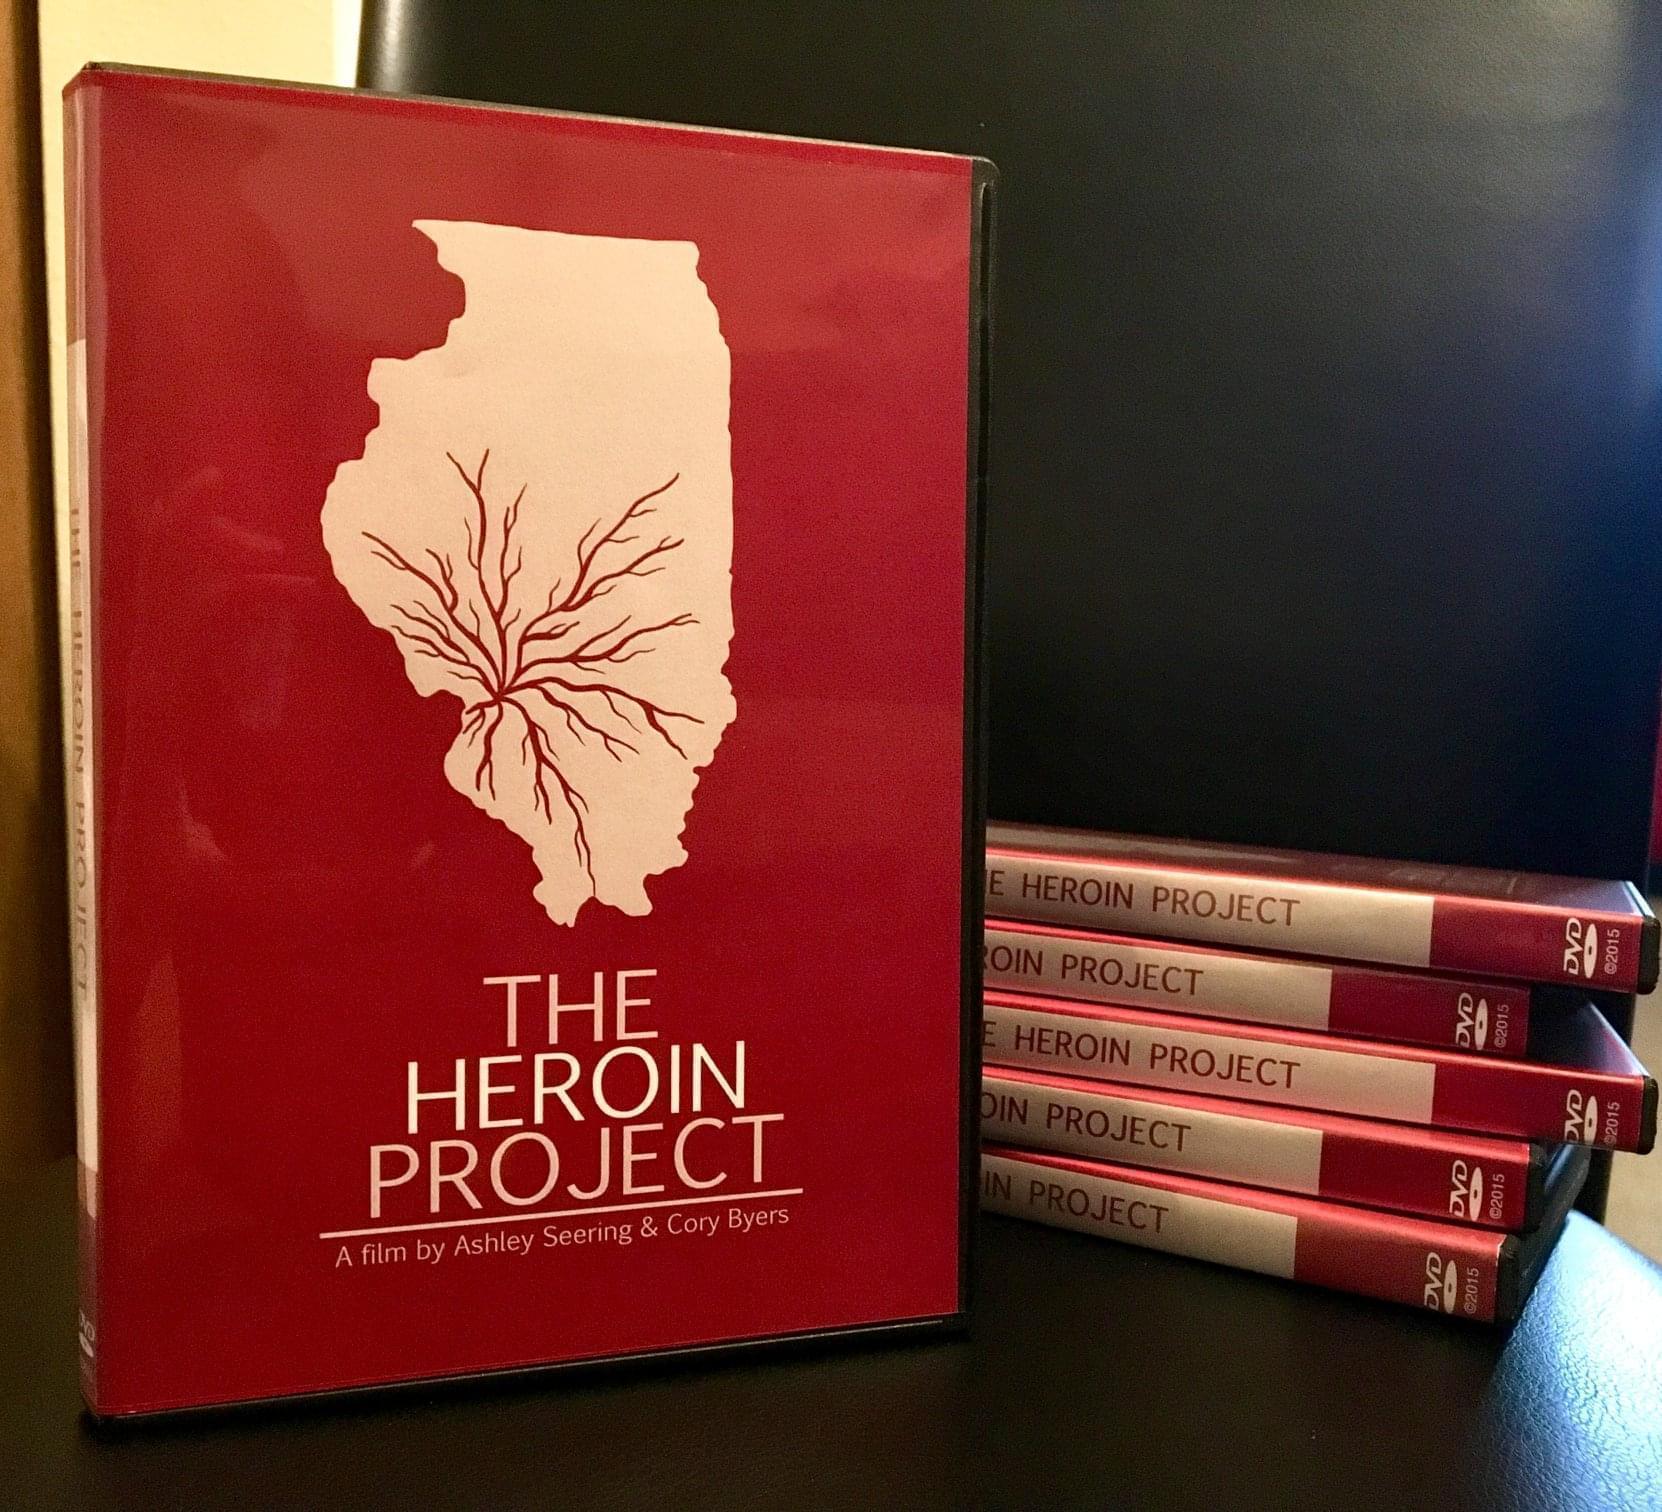 The Heroin Project